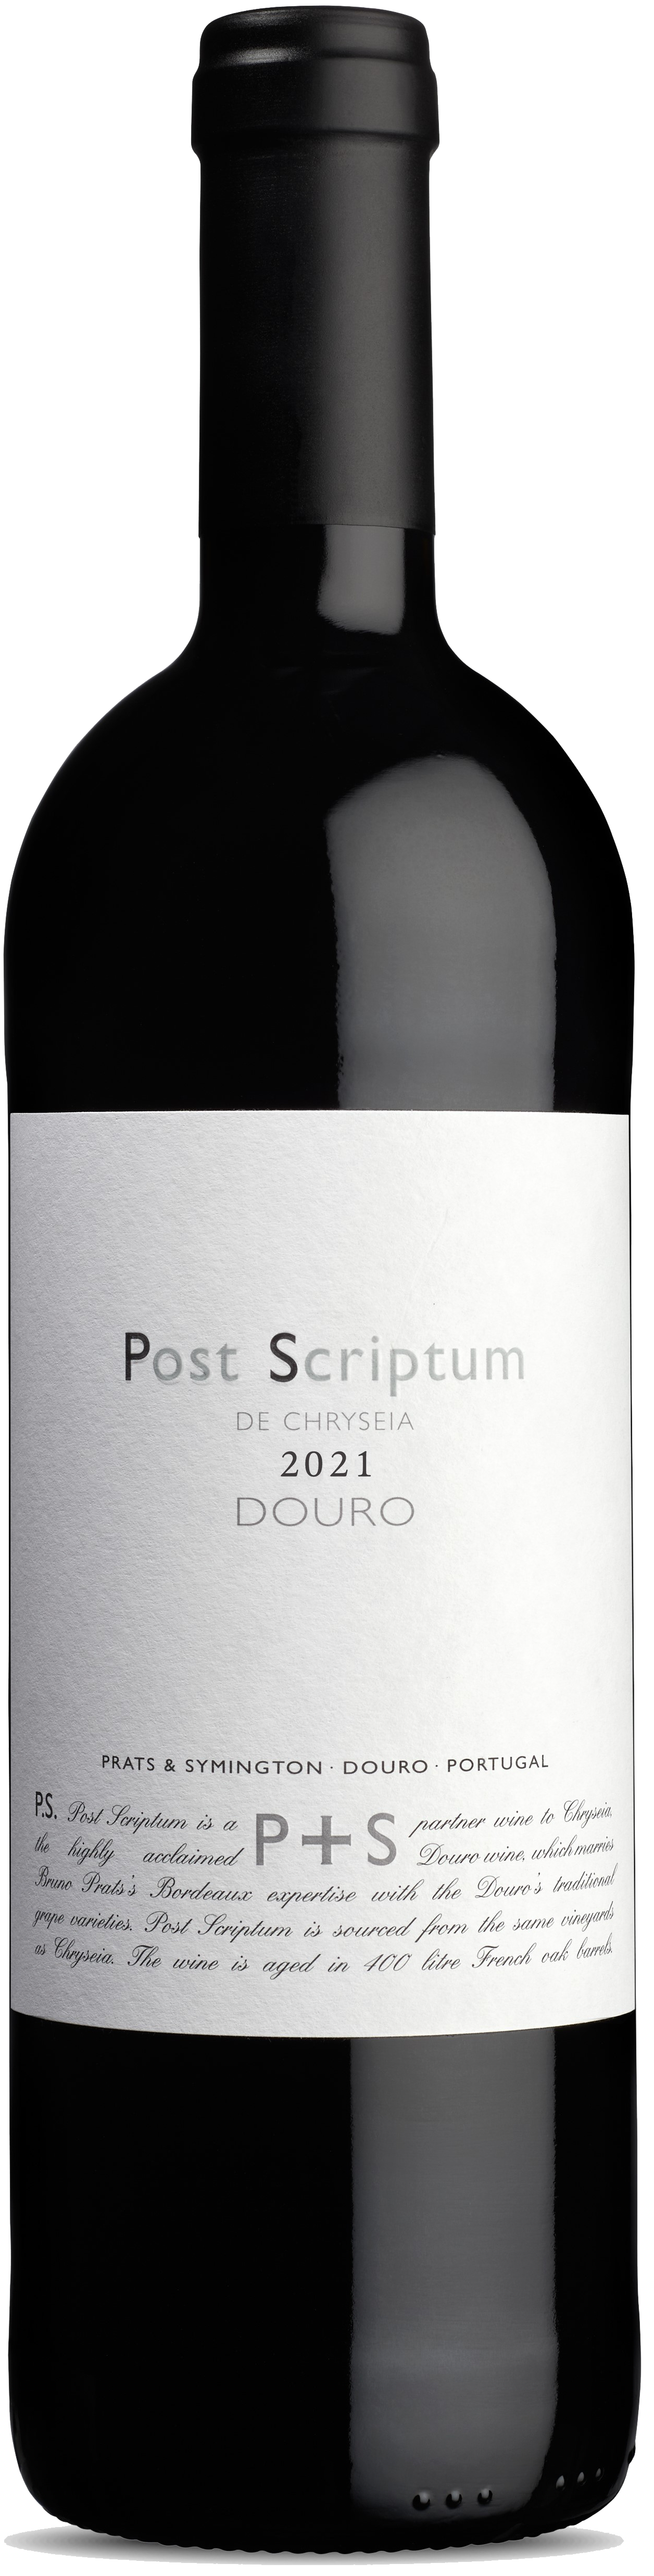 Product Image for P&S POST SCRIPTUM DE CHRYSEIA DOURO RED 2021